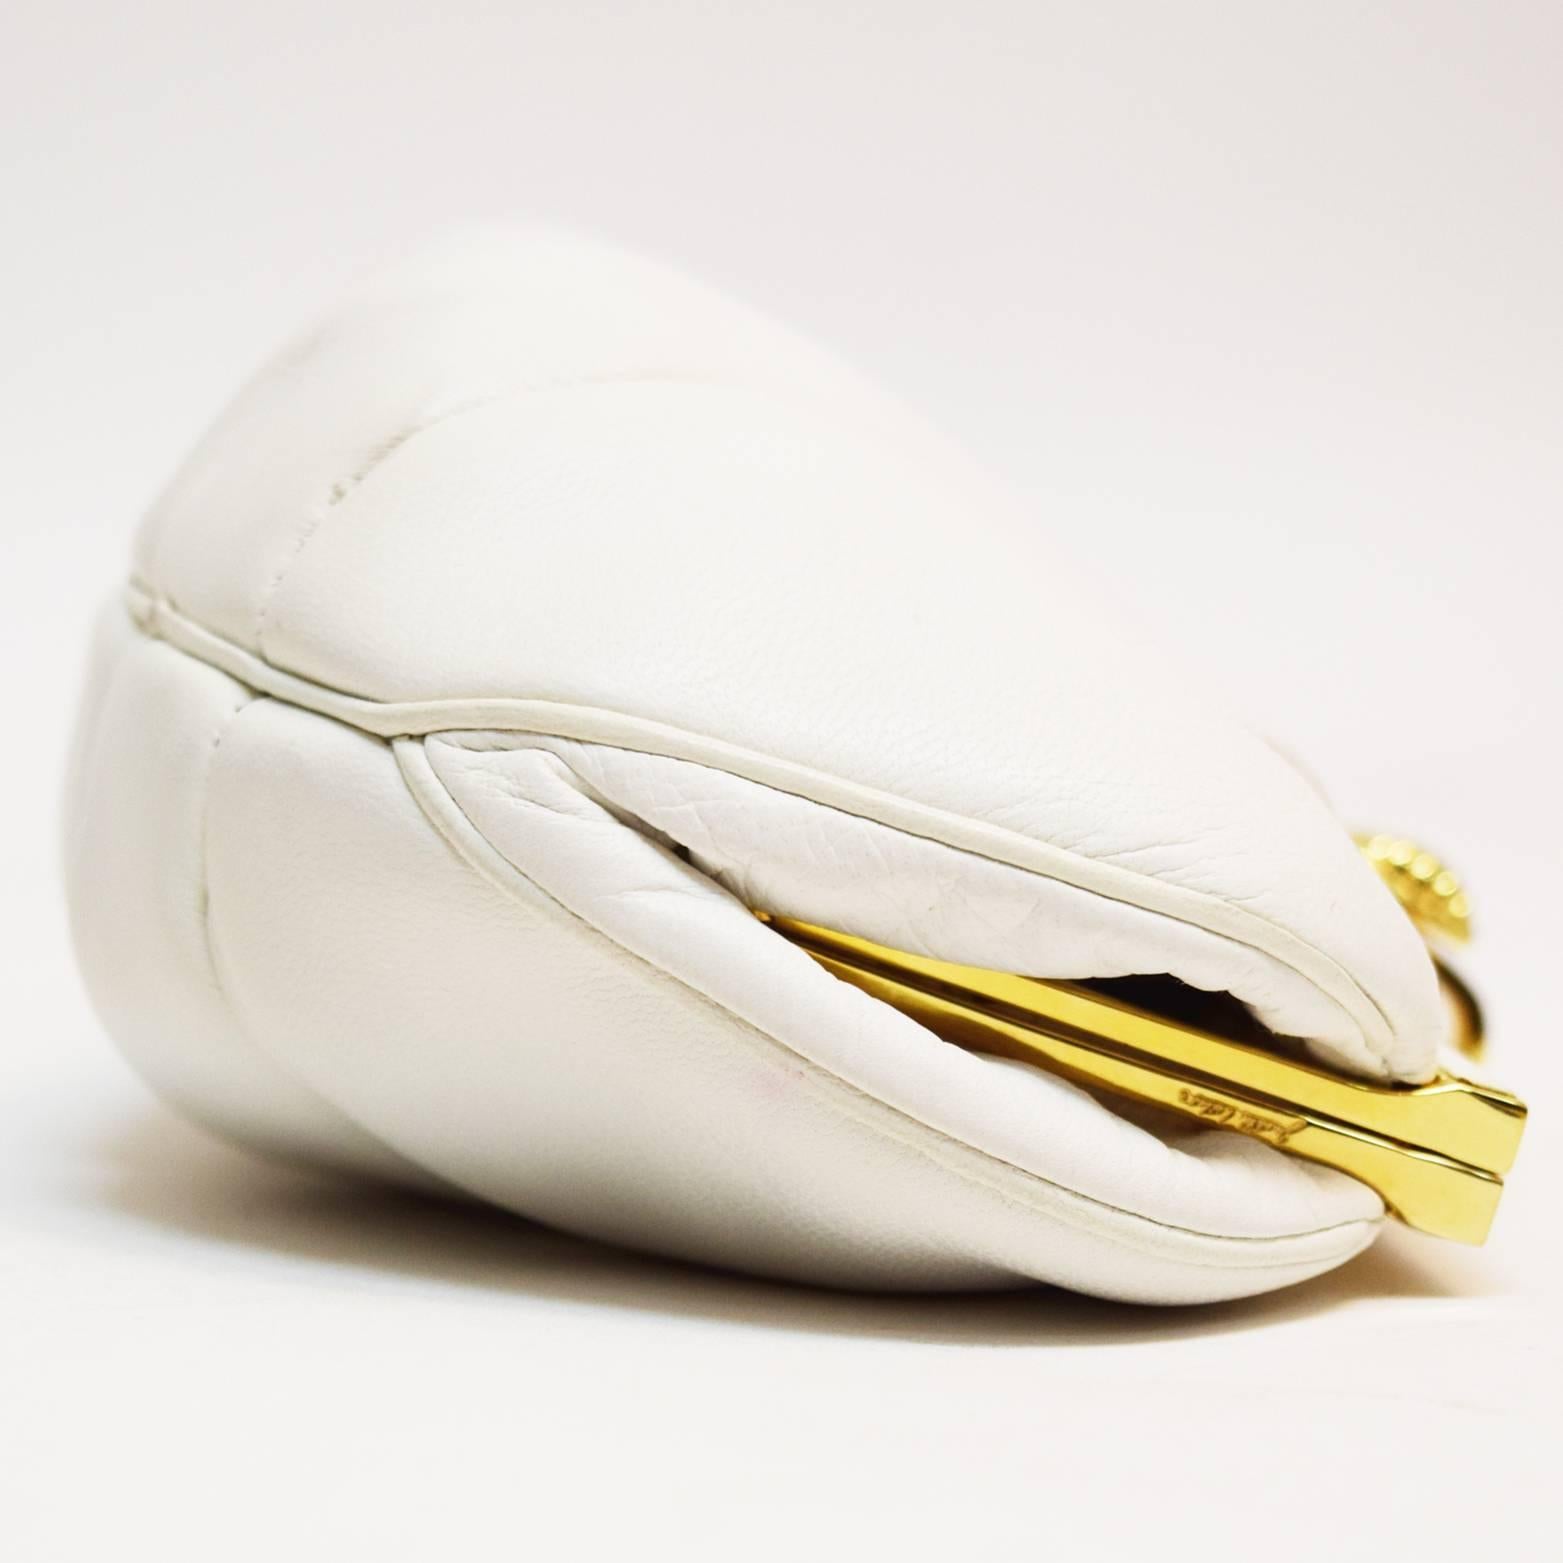 Judith Leiber White Leather Convertible Clutch In Excellent Condition For Sale In Henrico, VA